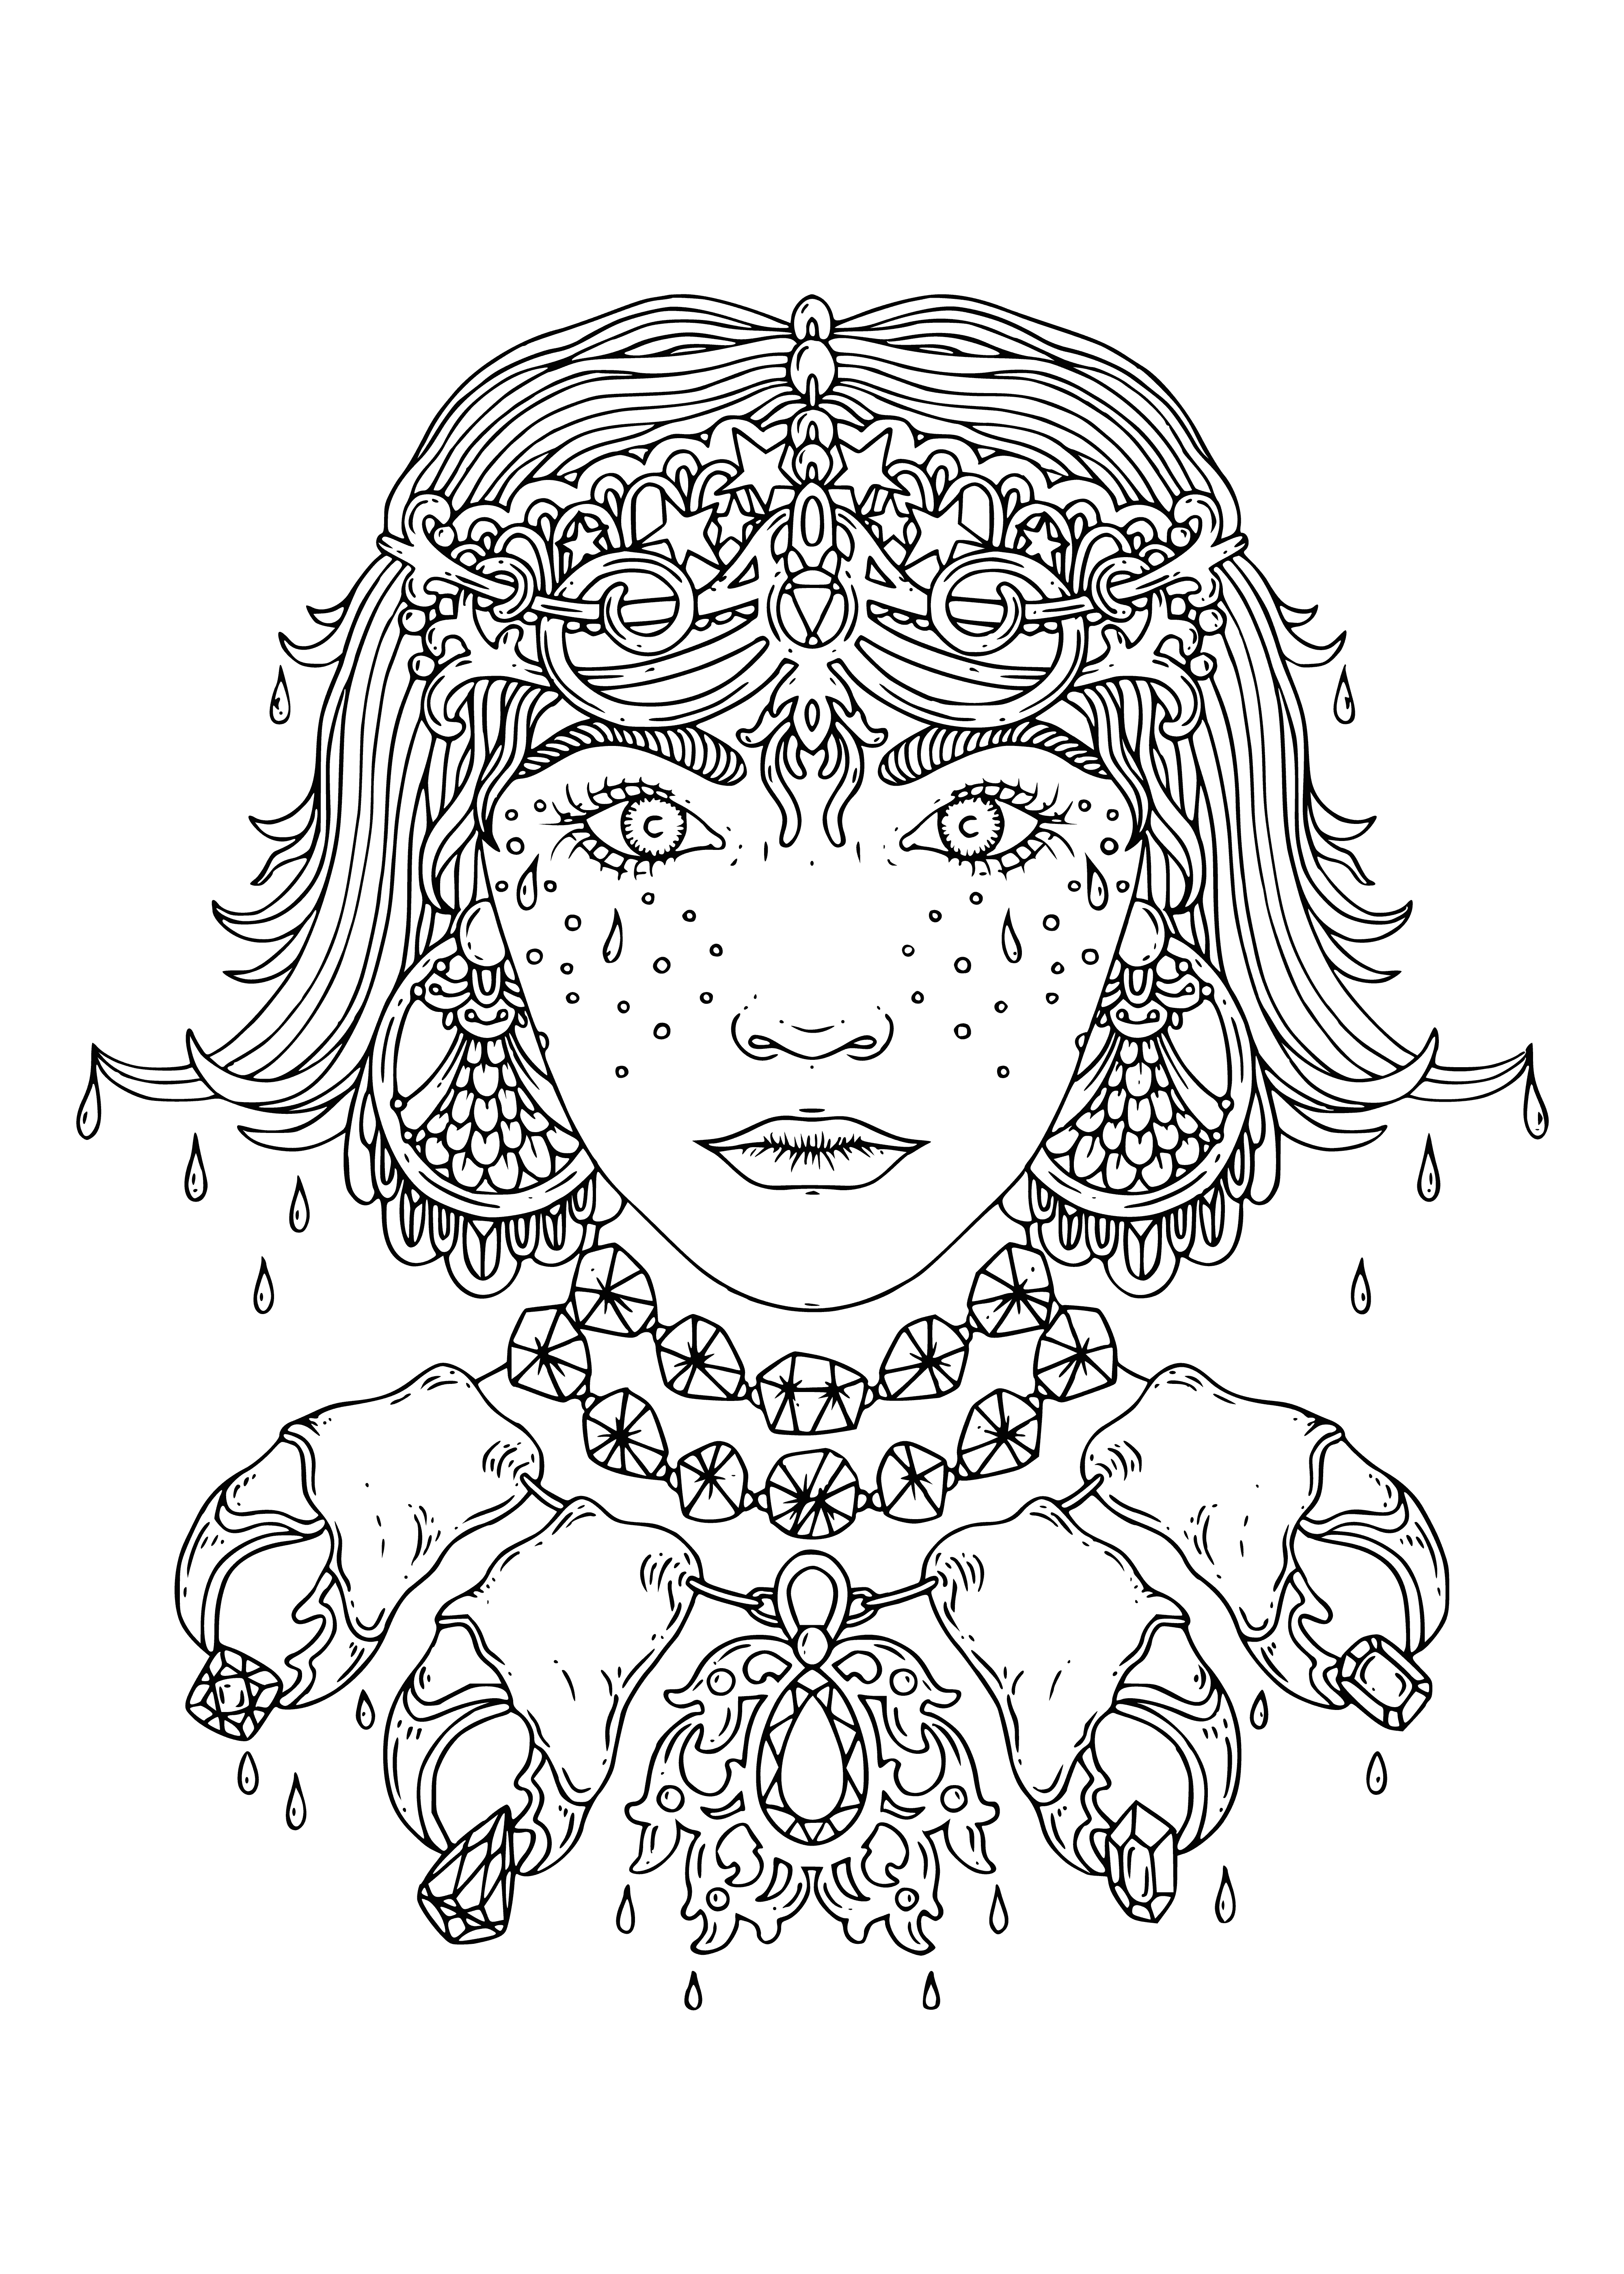 coloring page: Girl in crown of flowers & shells holds conch shell. Surrounded by sea creatures - Adult Coloring Pages Antistress Girls - Sea maiden.